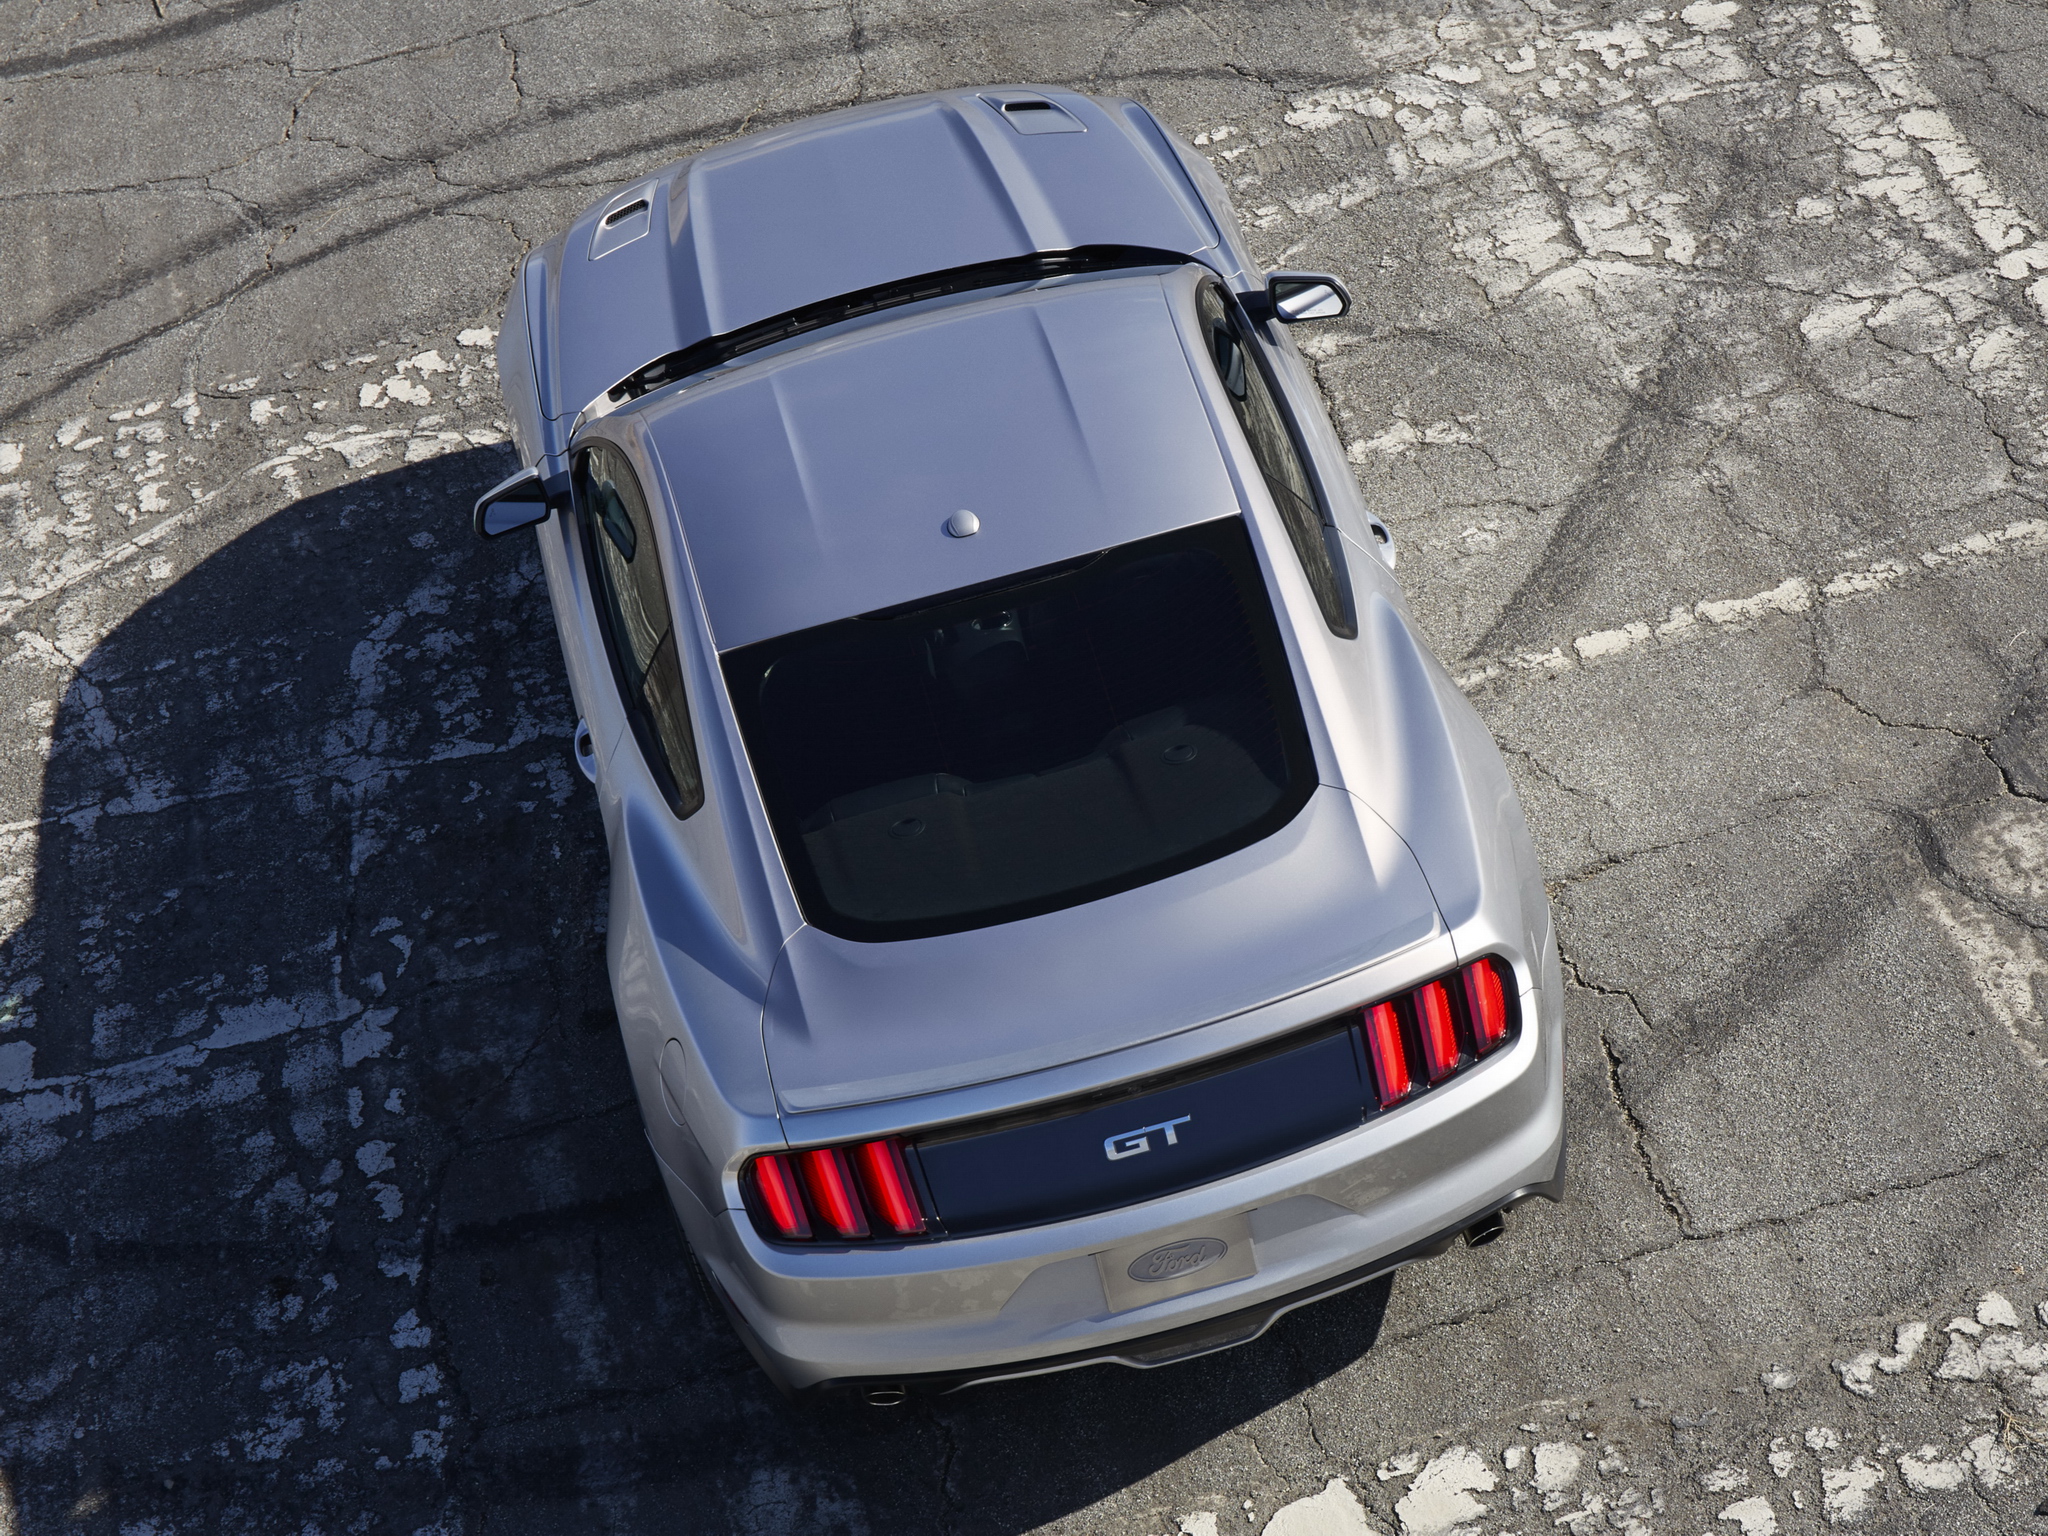 2014, Ford, Mustang, G t, Muscle Wallpaper